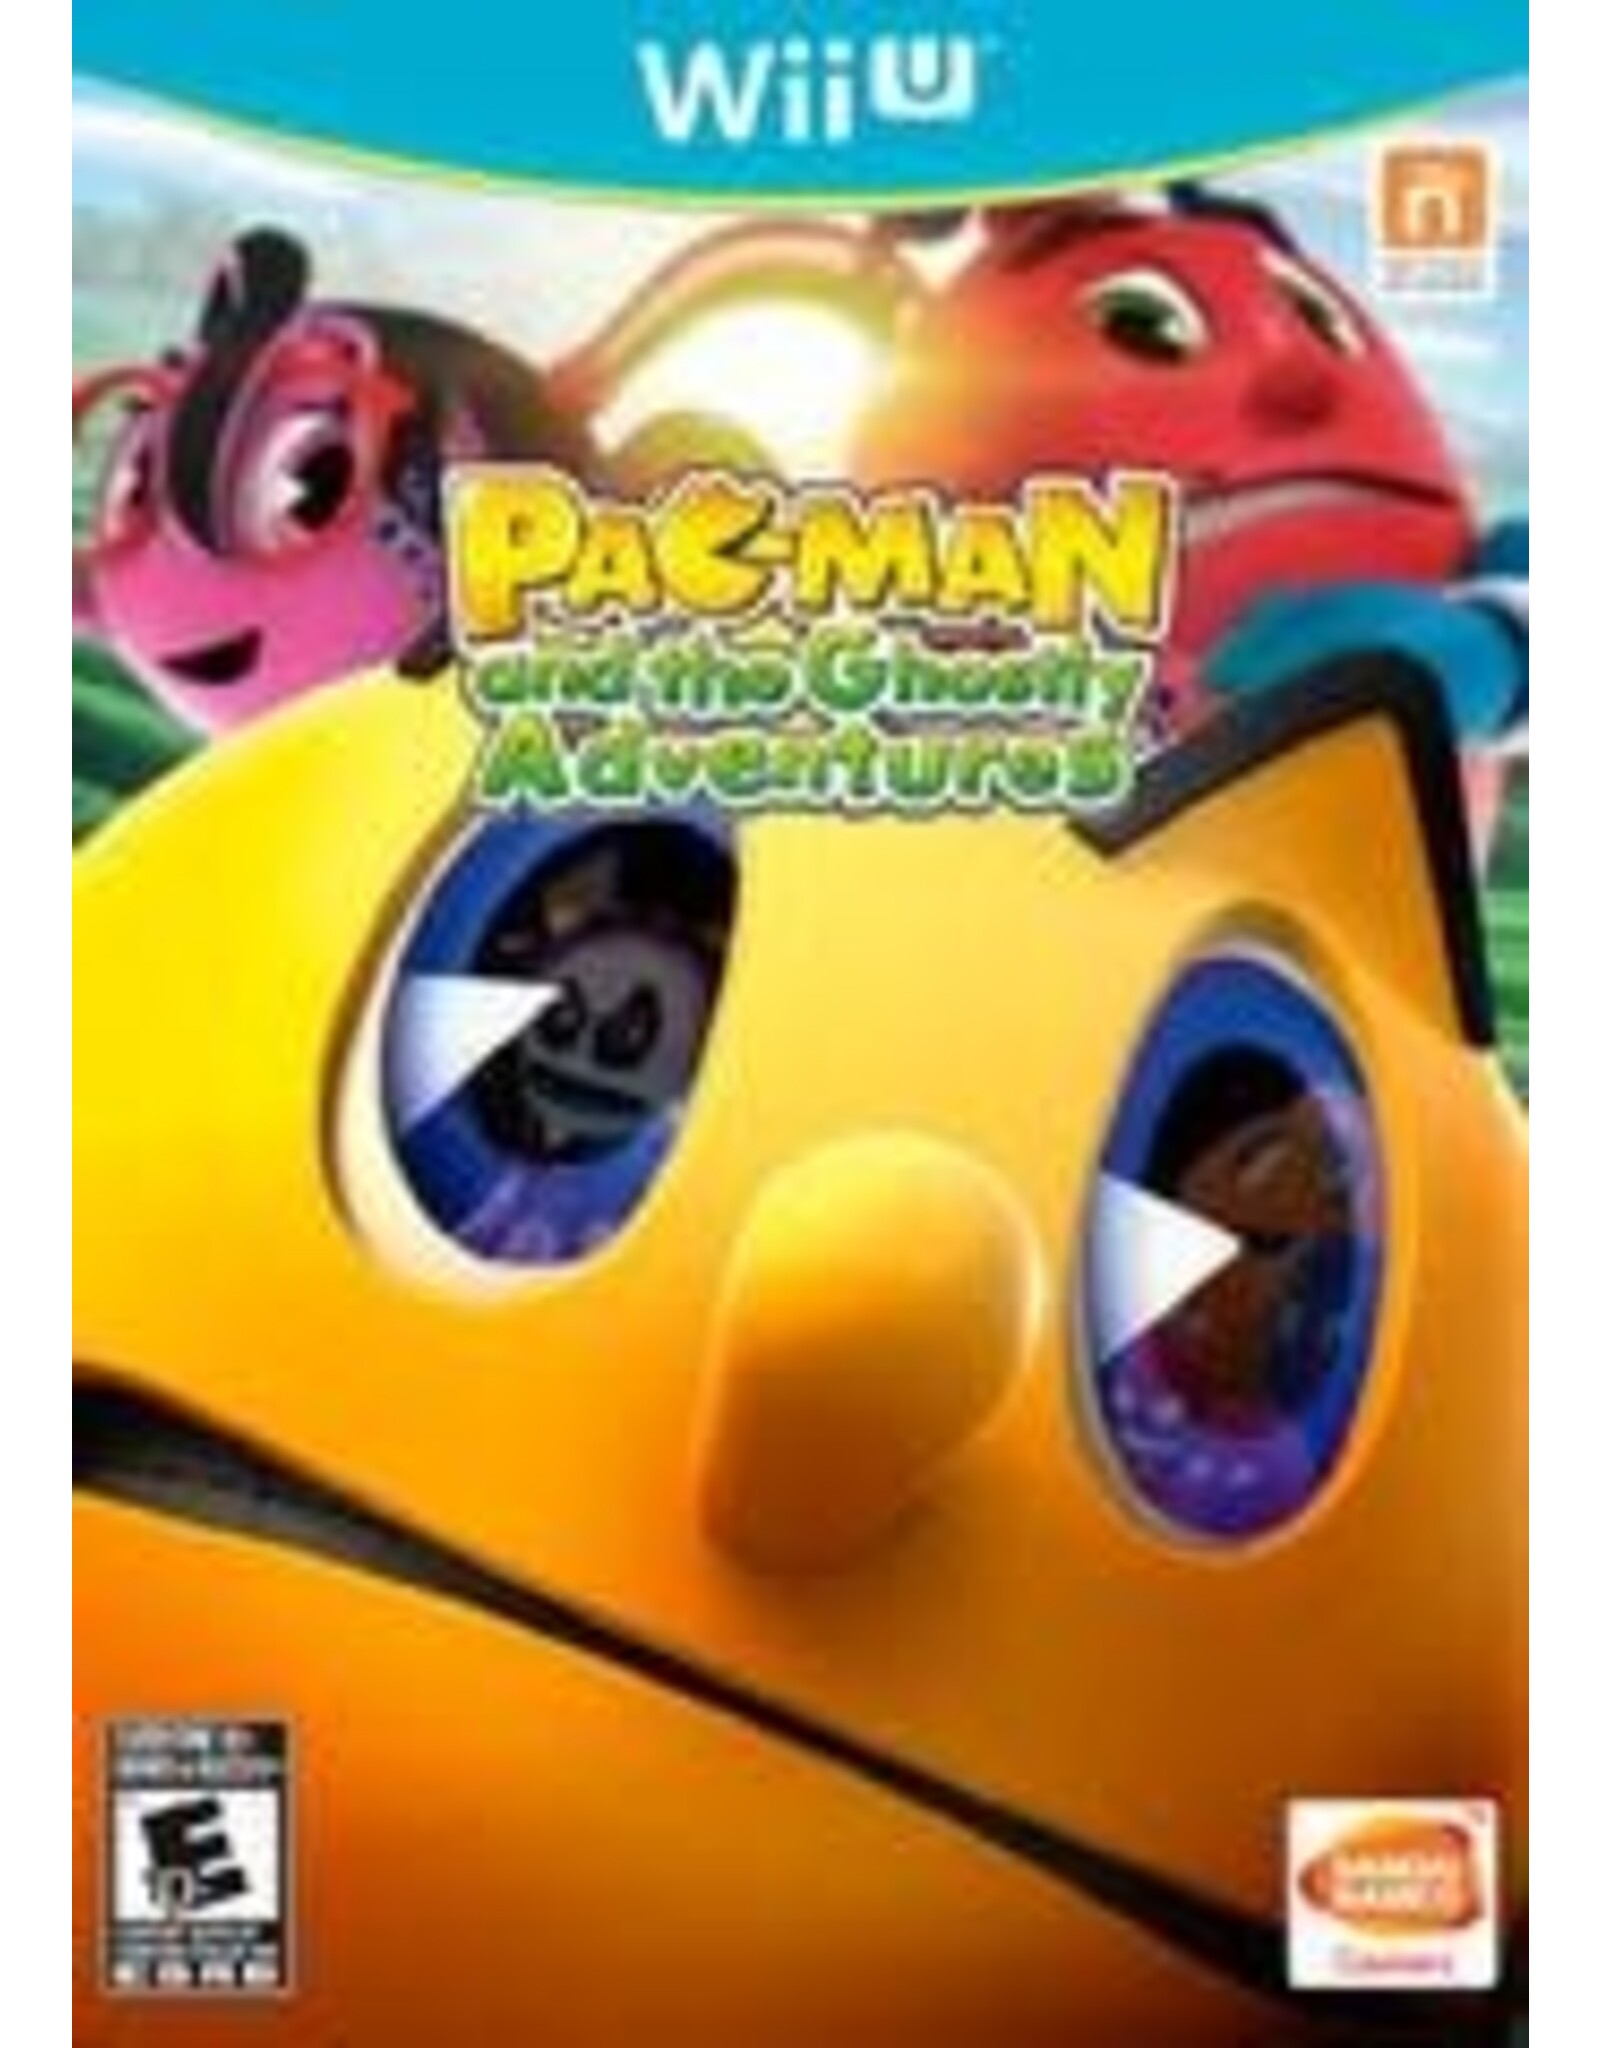 Wii U Pac-Man and the Ghostly Adventures (Used)